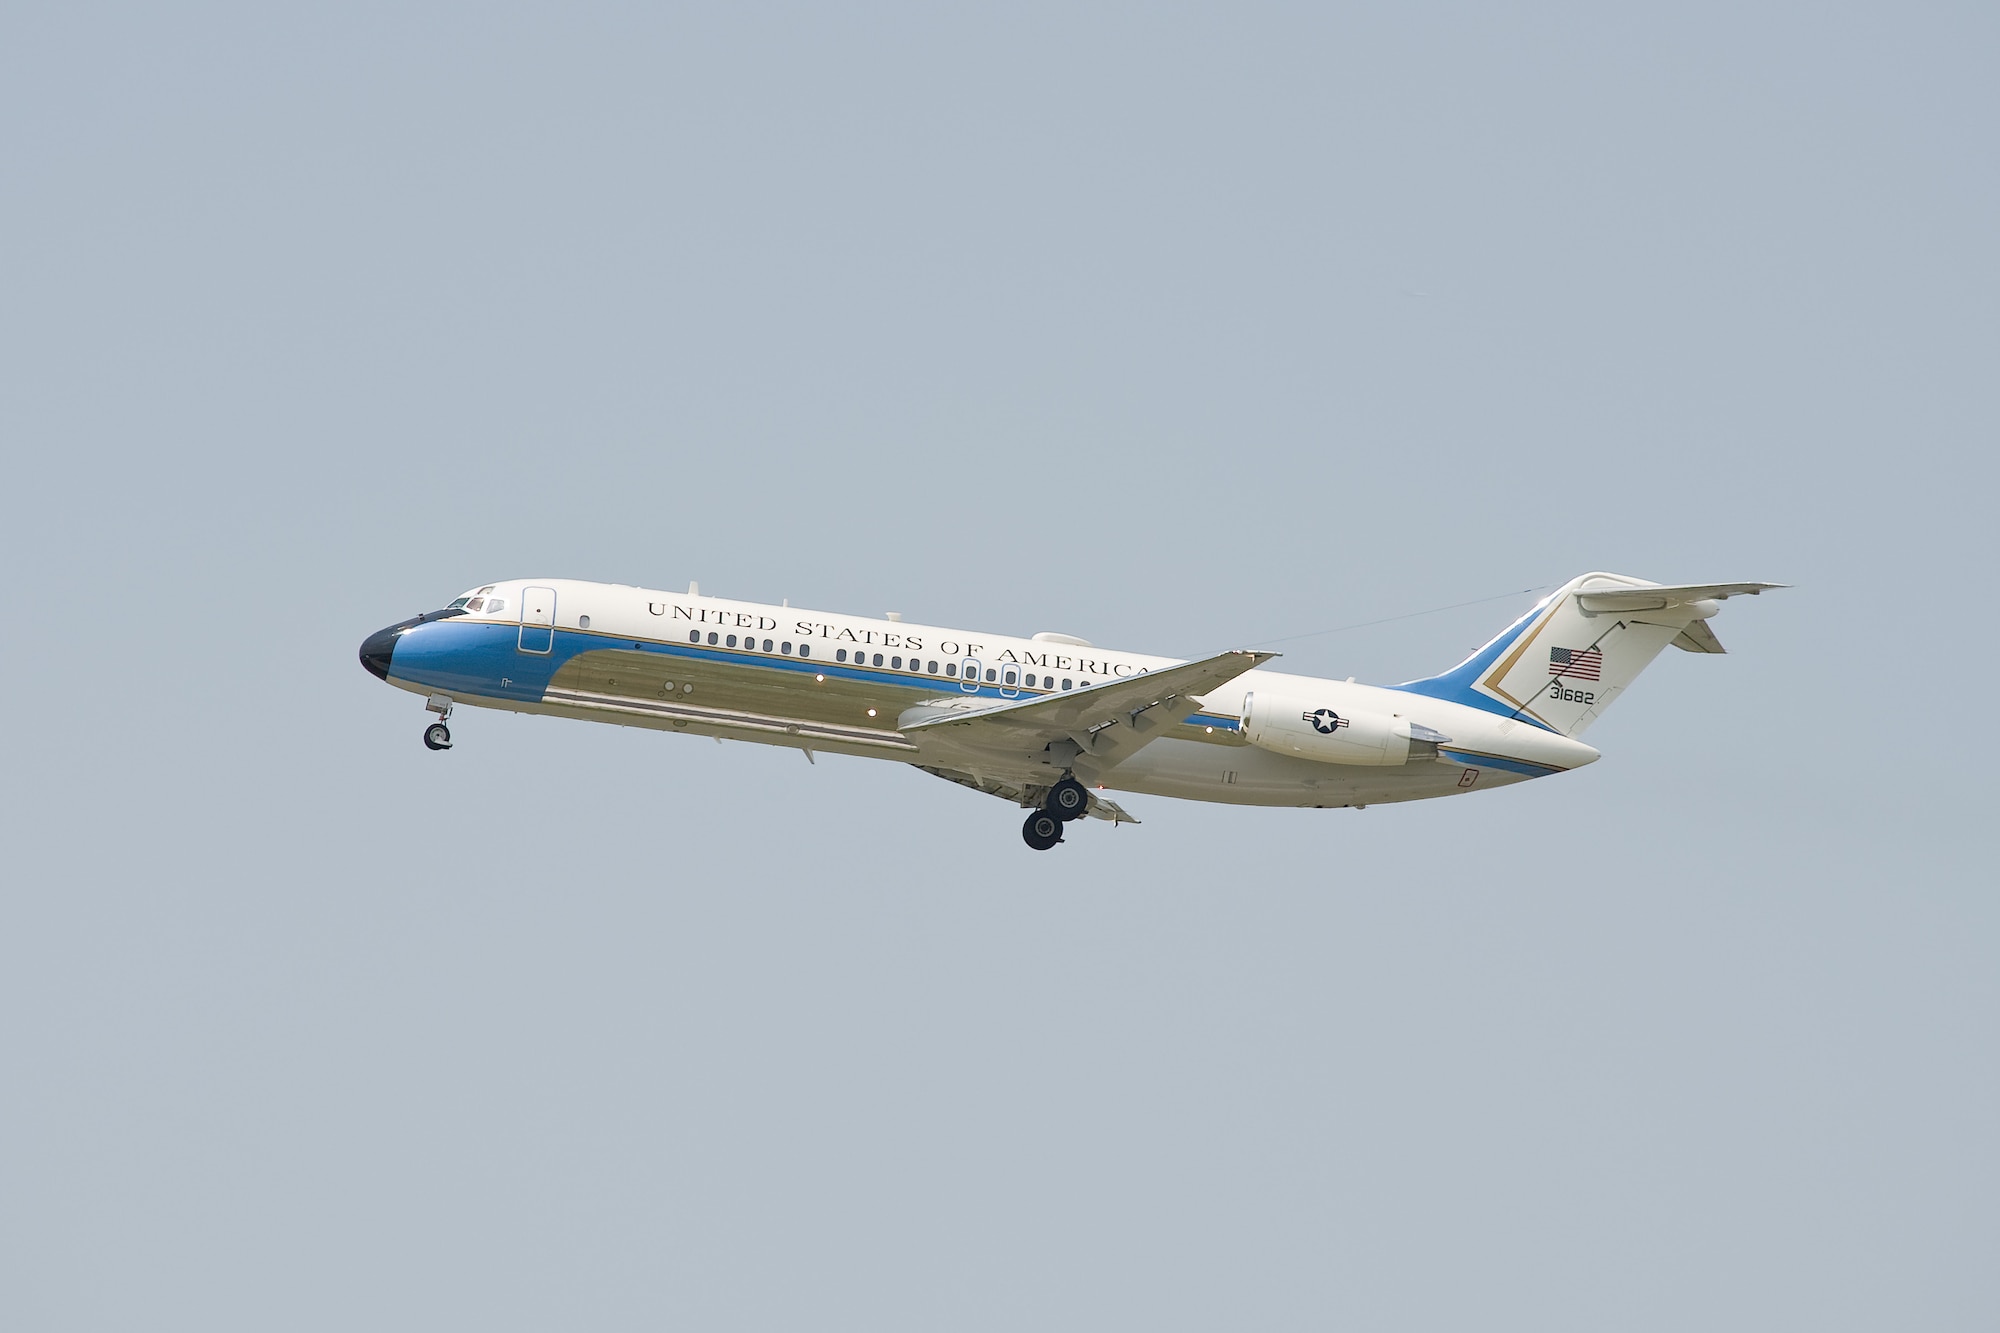 Air Force Two undertakes its final flight Aug. 18, 2011, above Dover Air Force Base, Del. The aircraft retired at the Air Mobility Command Museum after more than 30 years of service. (U.S. Air Force photo by Roland Balik)